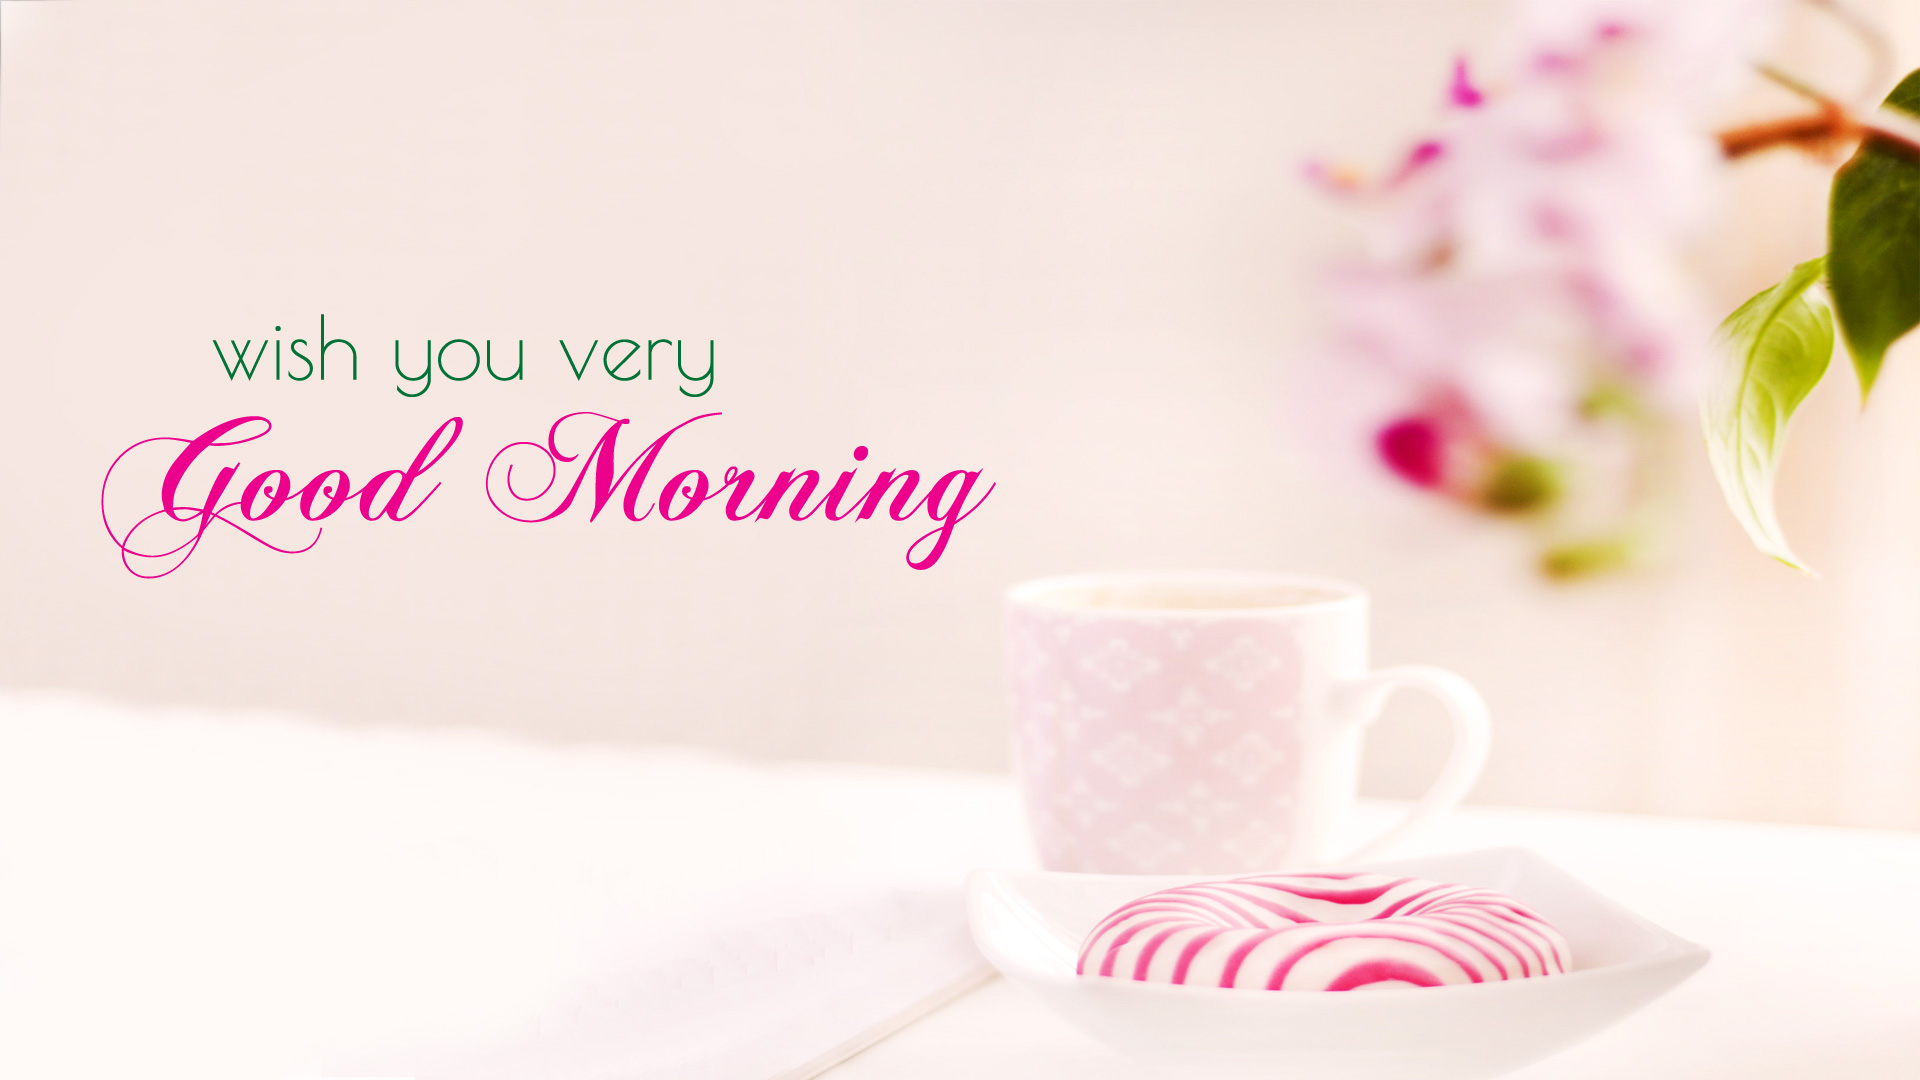 Good Morning Wallpaper with Flowers, Full HD 1920x1080 GM ...